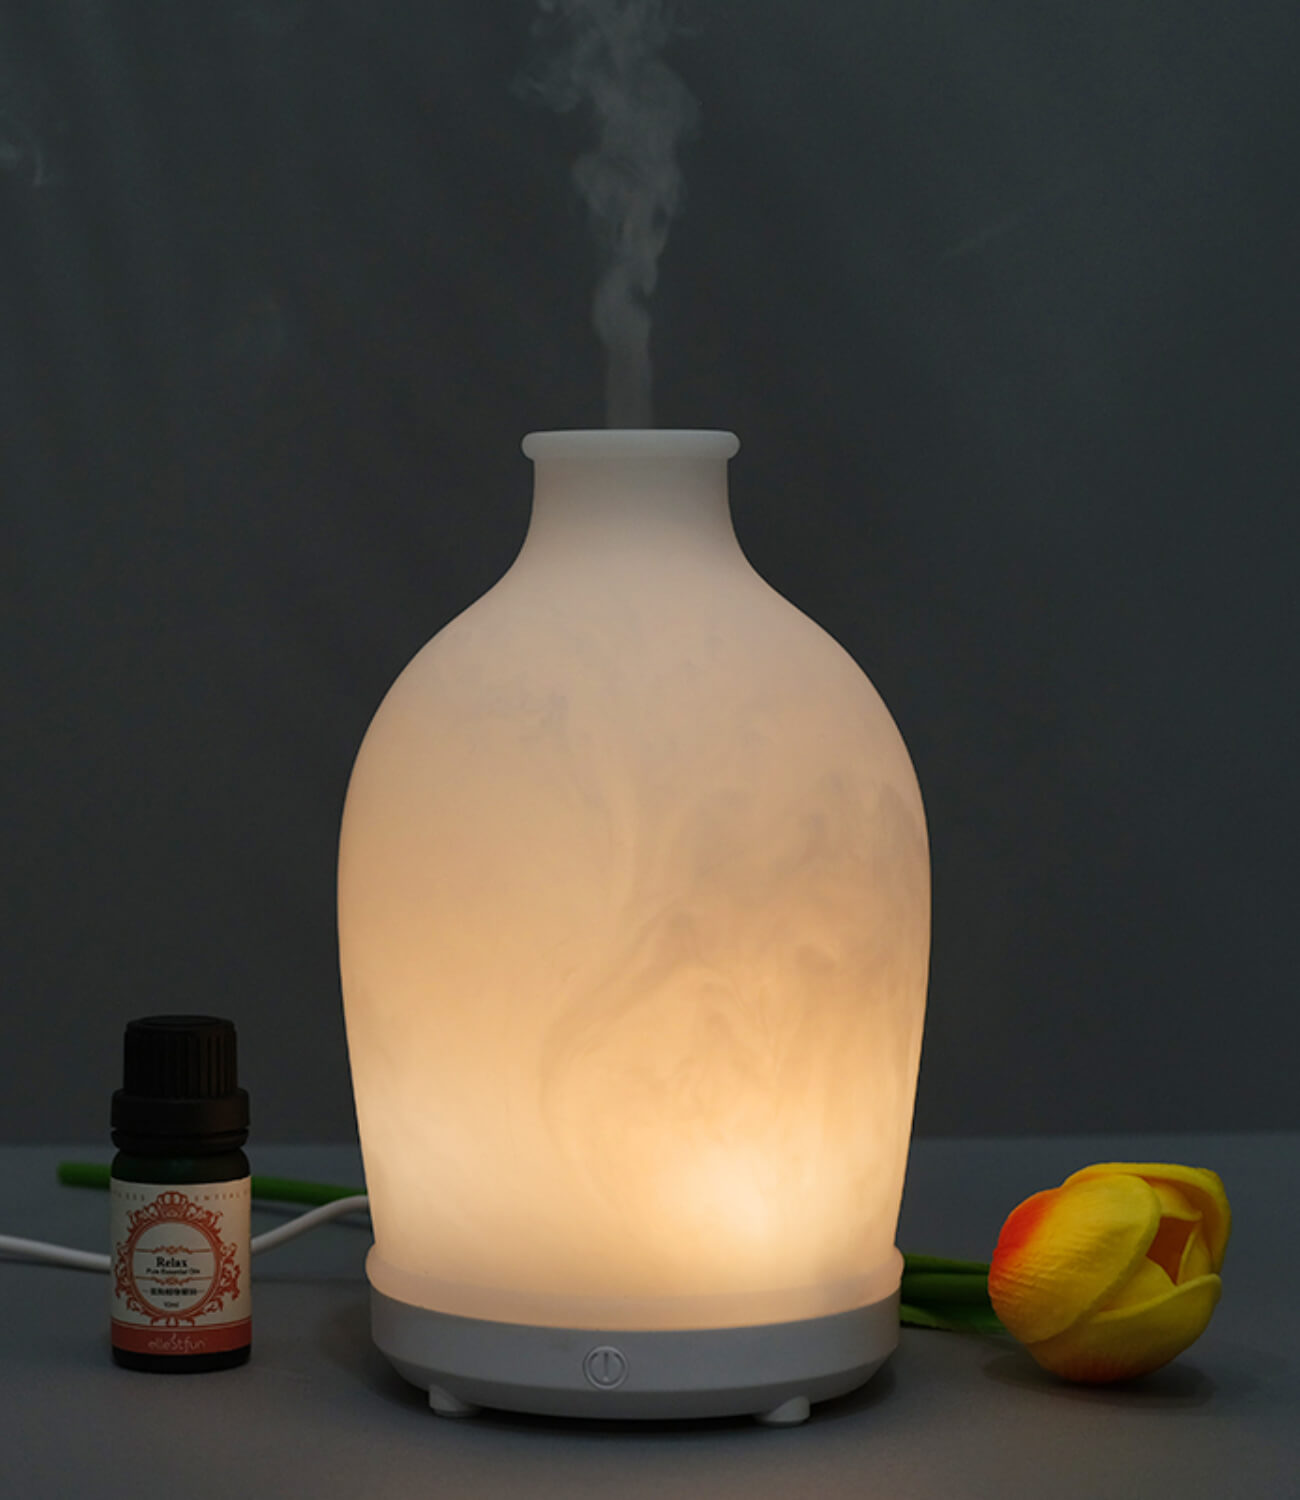 SereneVase Diffuser - Tranquil Ambiance for Mindful Moments.